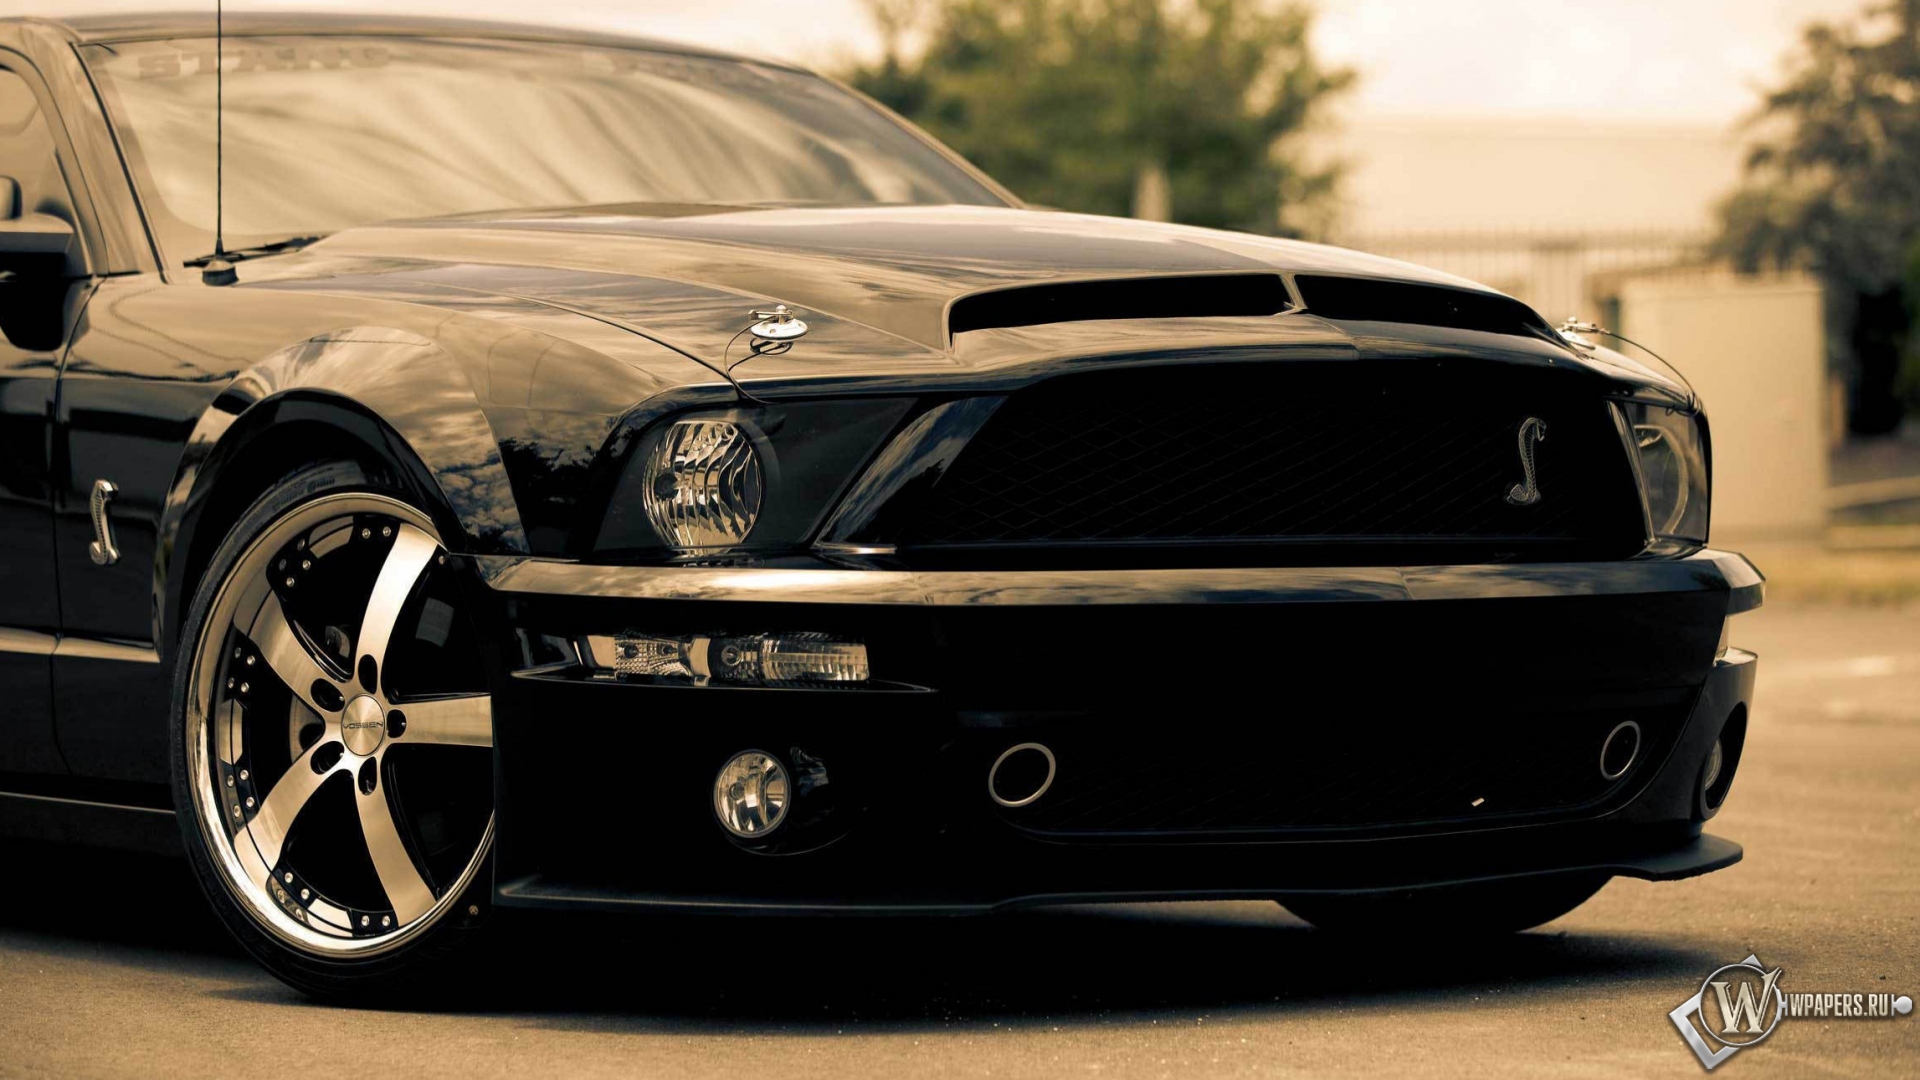 Ford shelby gt500 1920x1080